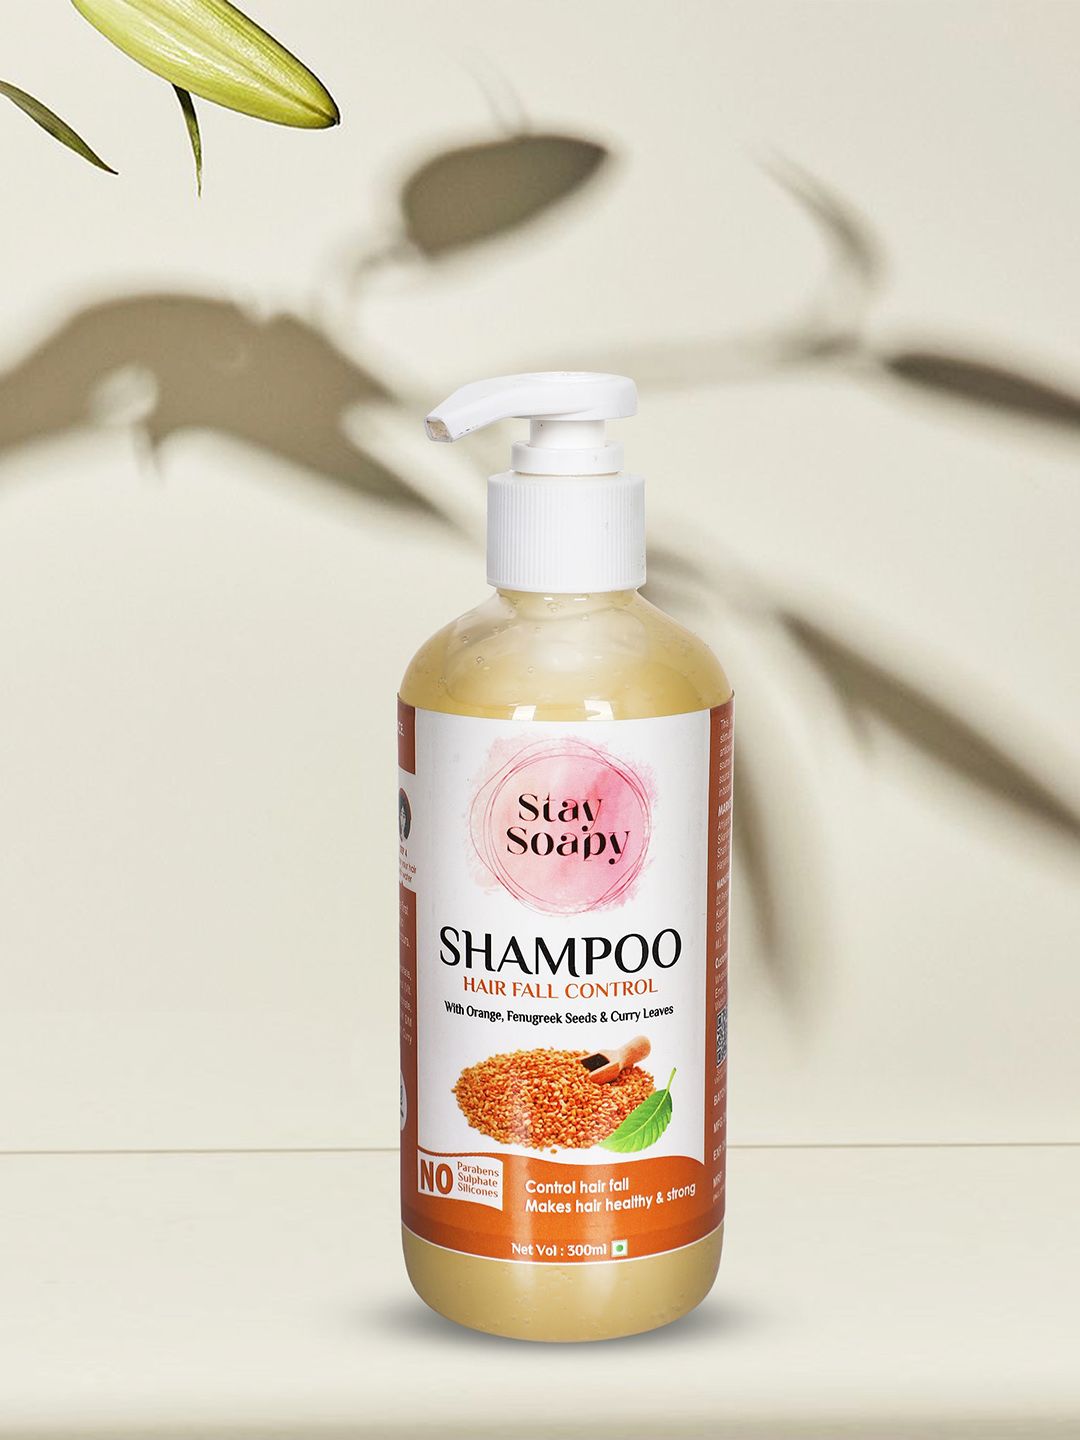 Stay Soapy Hair Fall Control Shampoo with Orange & Fenugreek Seeds - 300 ml Price in India